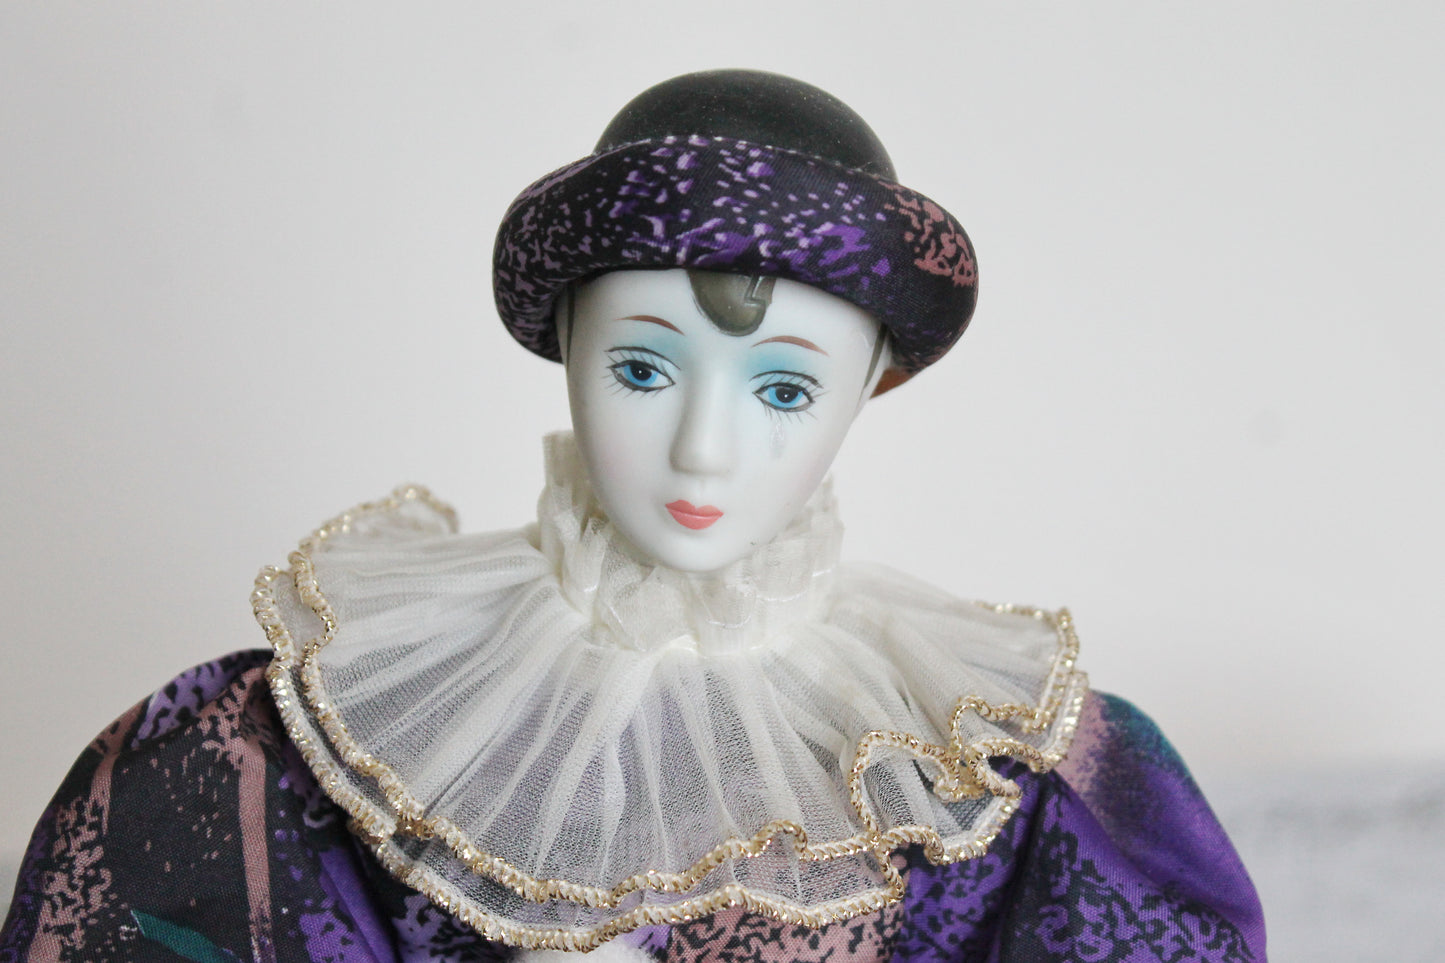 Vintage porcelain Venetian doll - Harlequin - 15 inches- collectible doll - porcelain doll - decor doll - 1980s